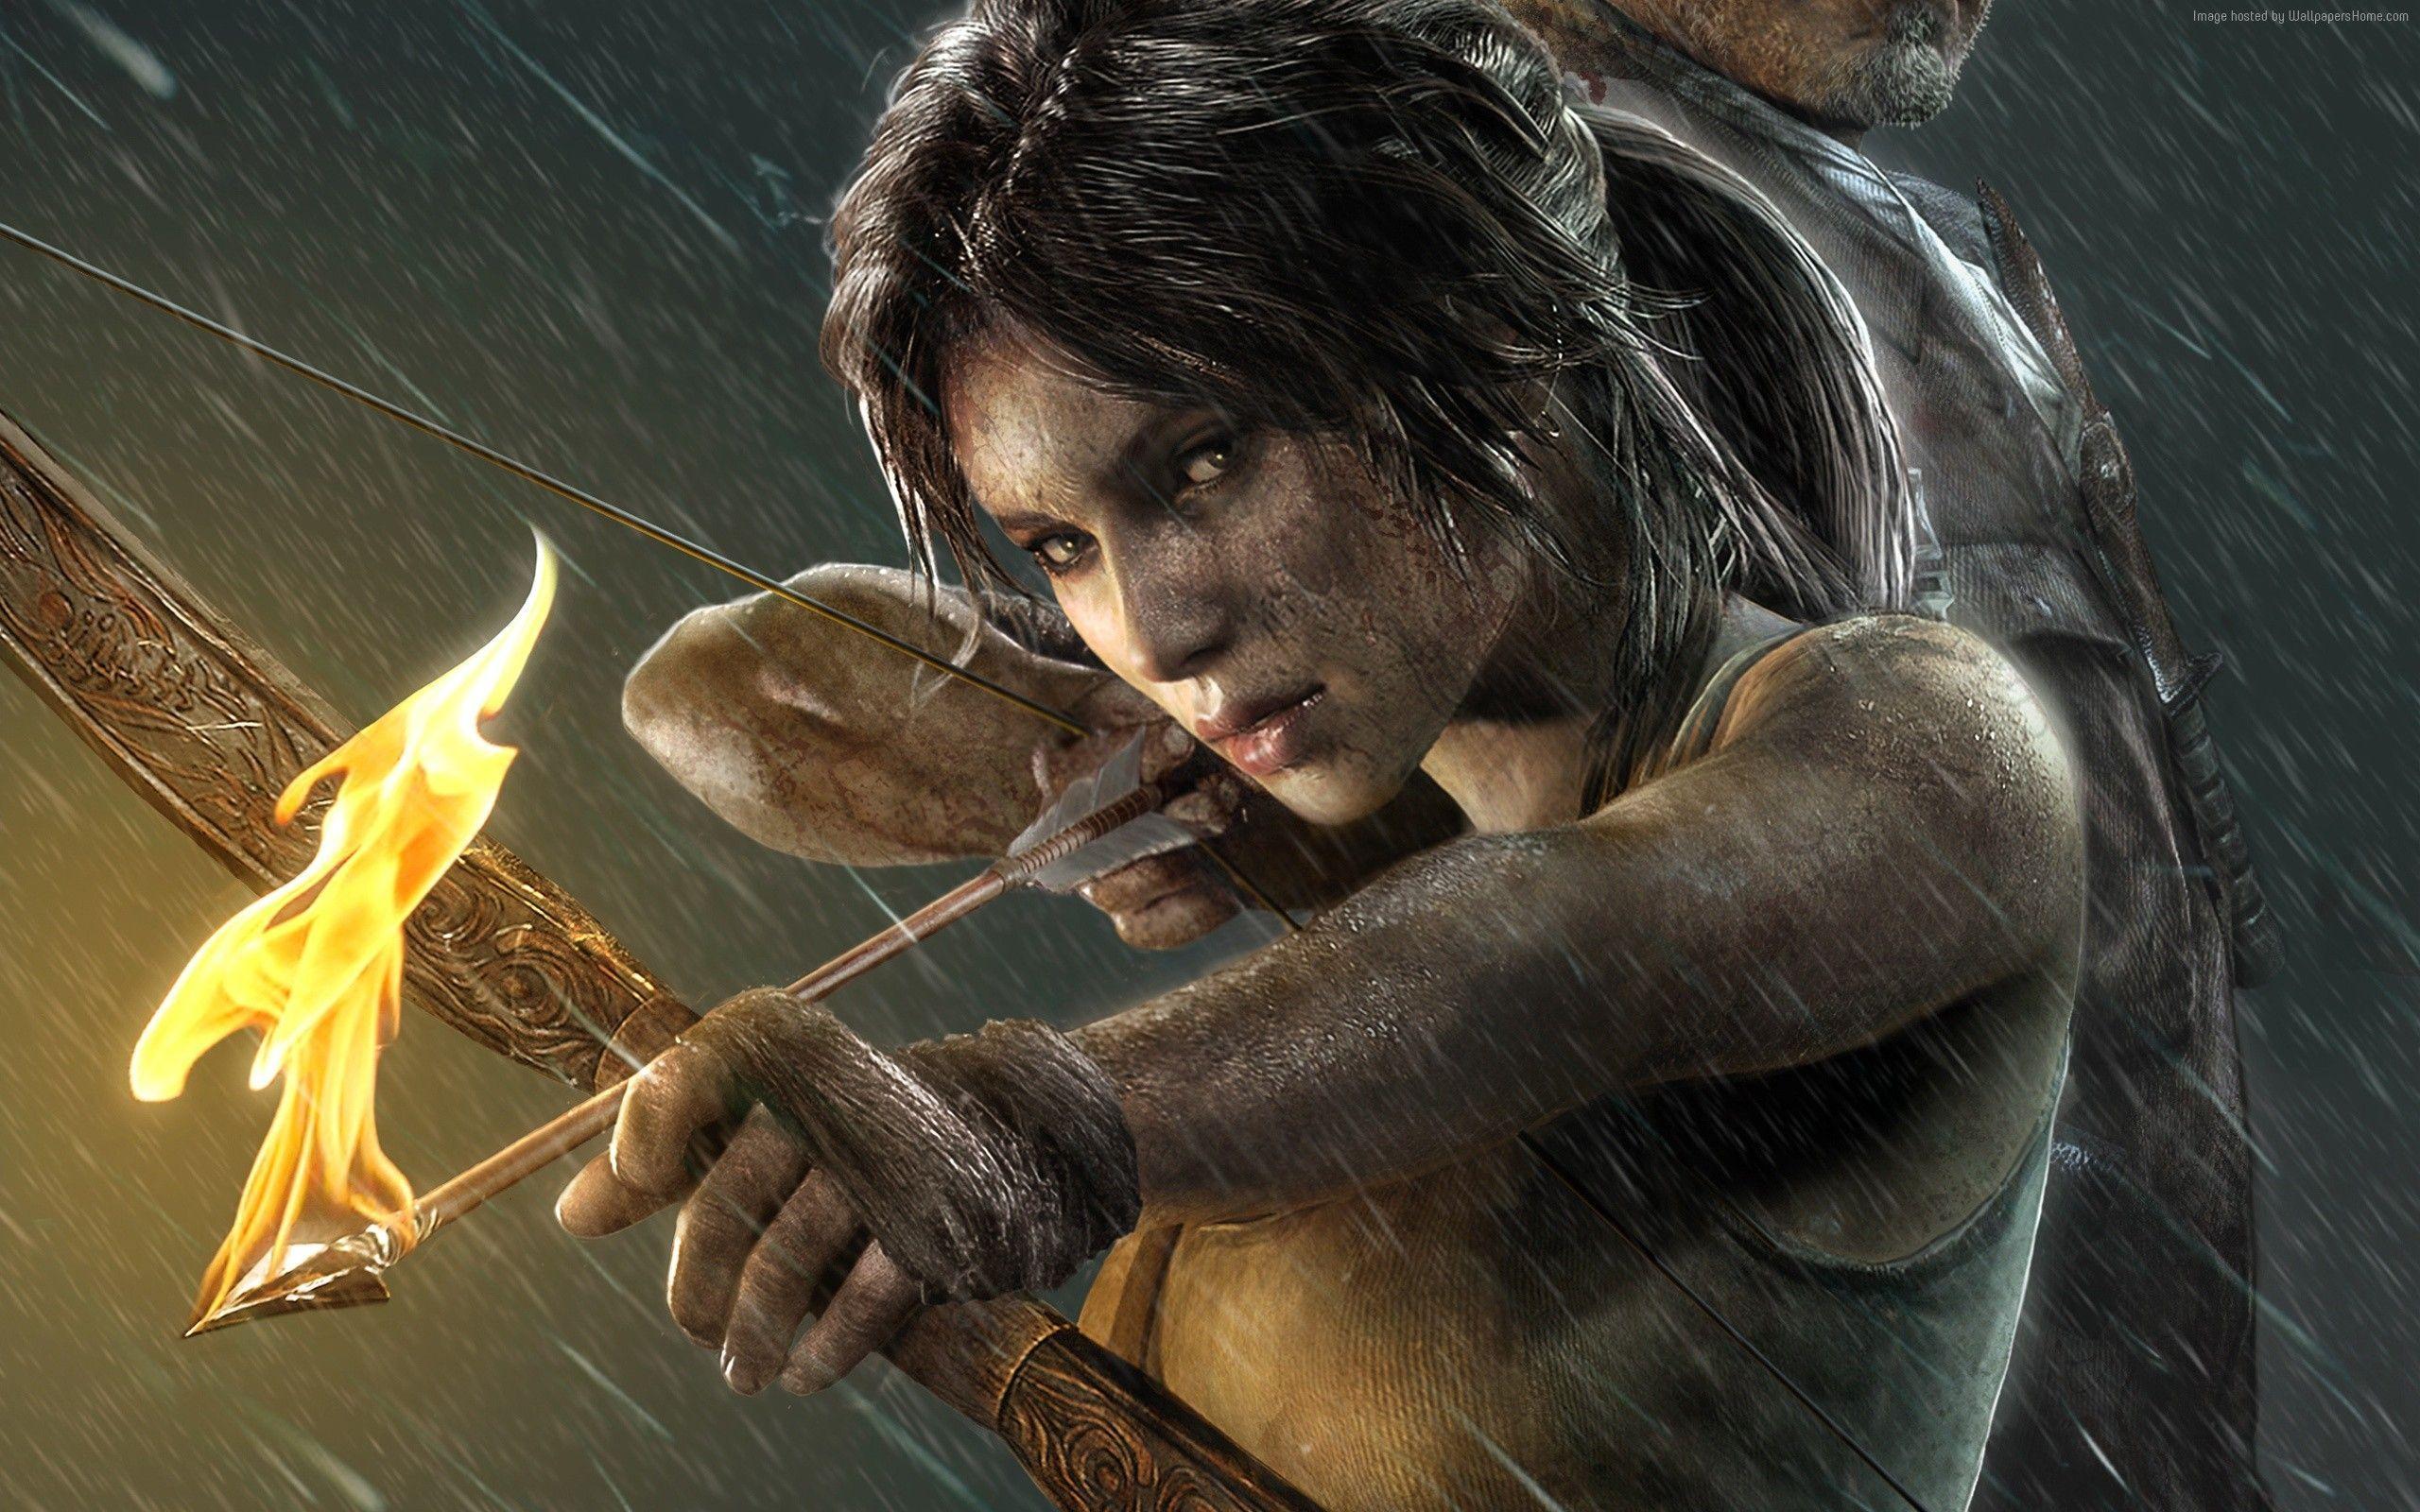 Rise of the Tomb Raider Wallpaper, Art / Our Choice: Rise